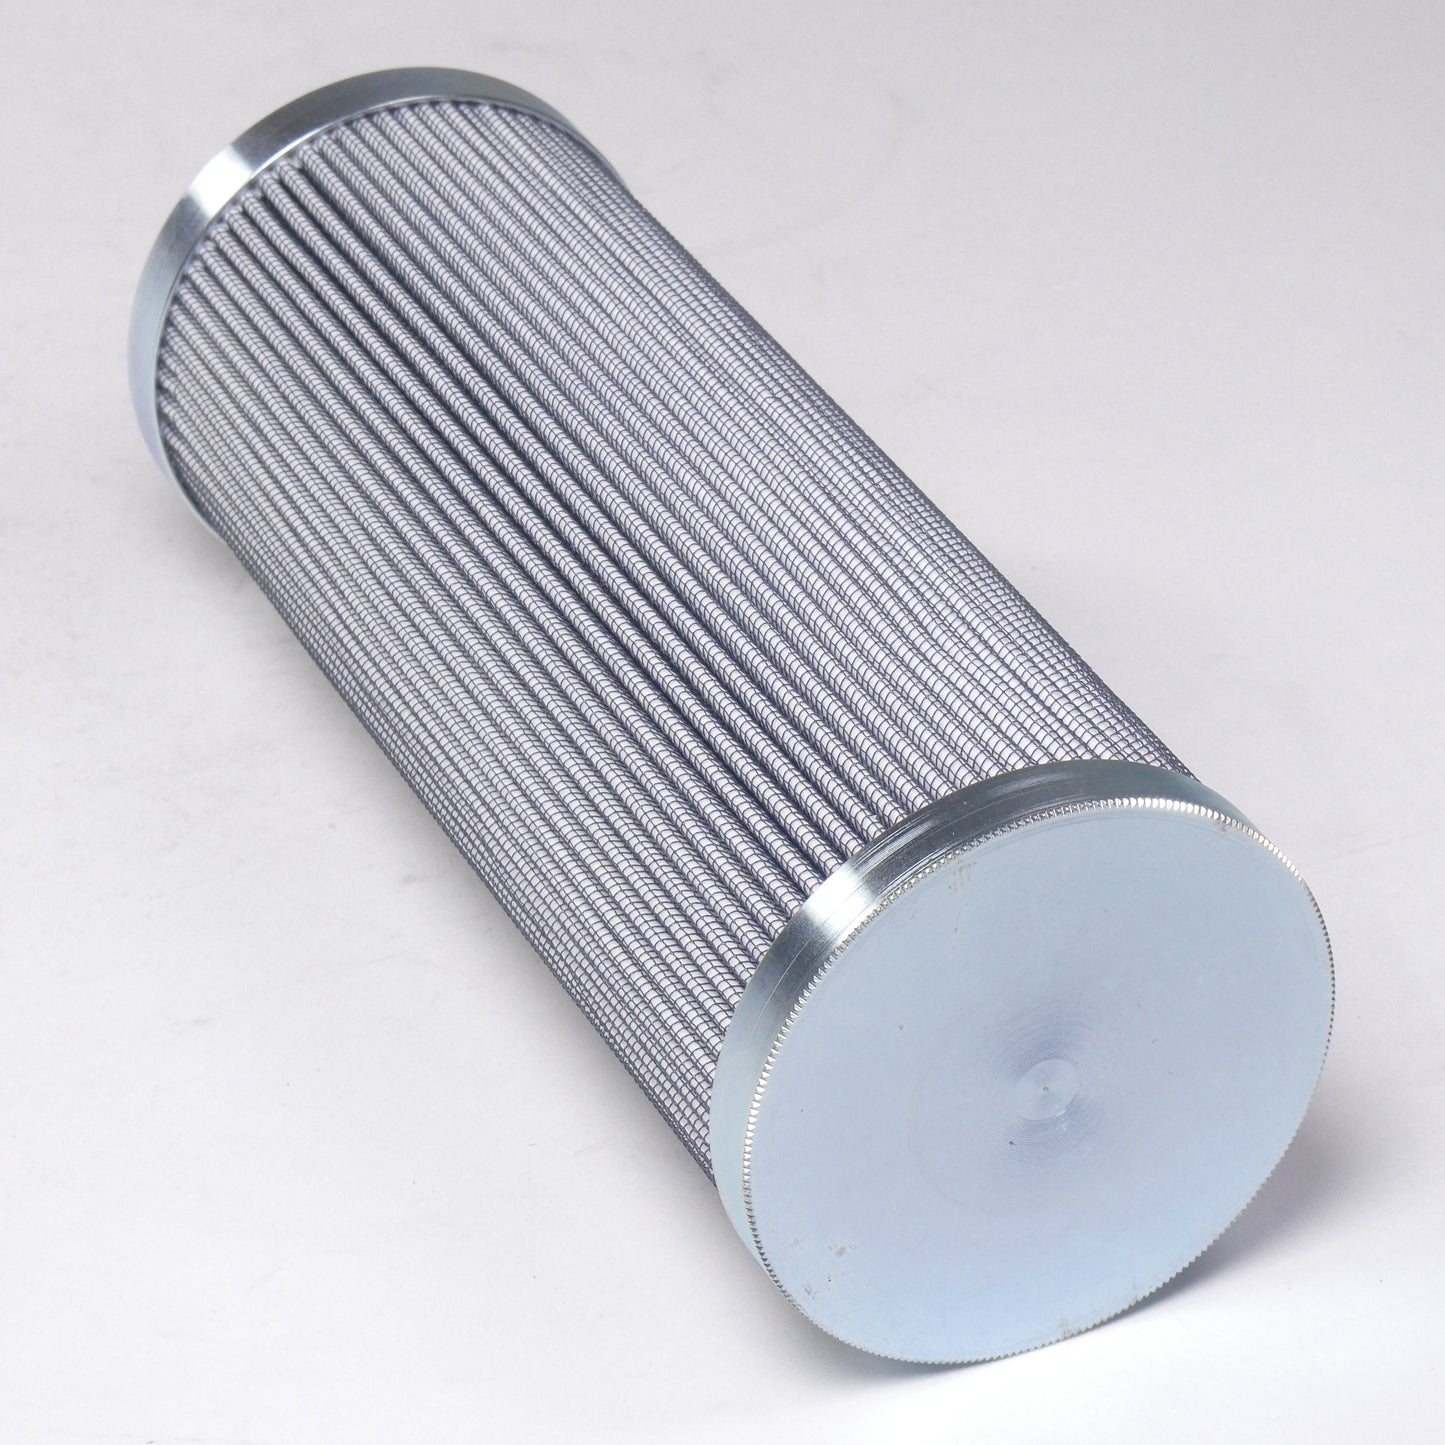 Hydrafil Replacement Filter Element for Hilco 3830-14-095-C